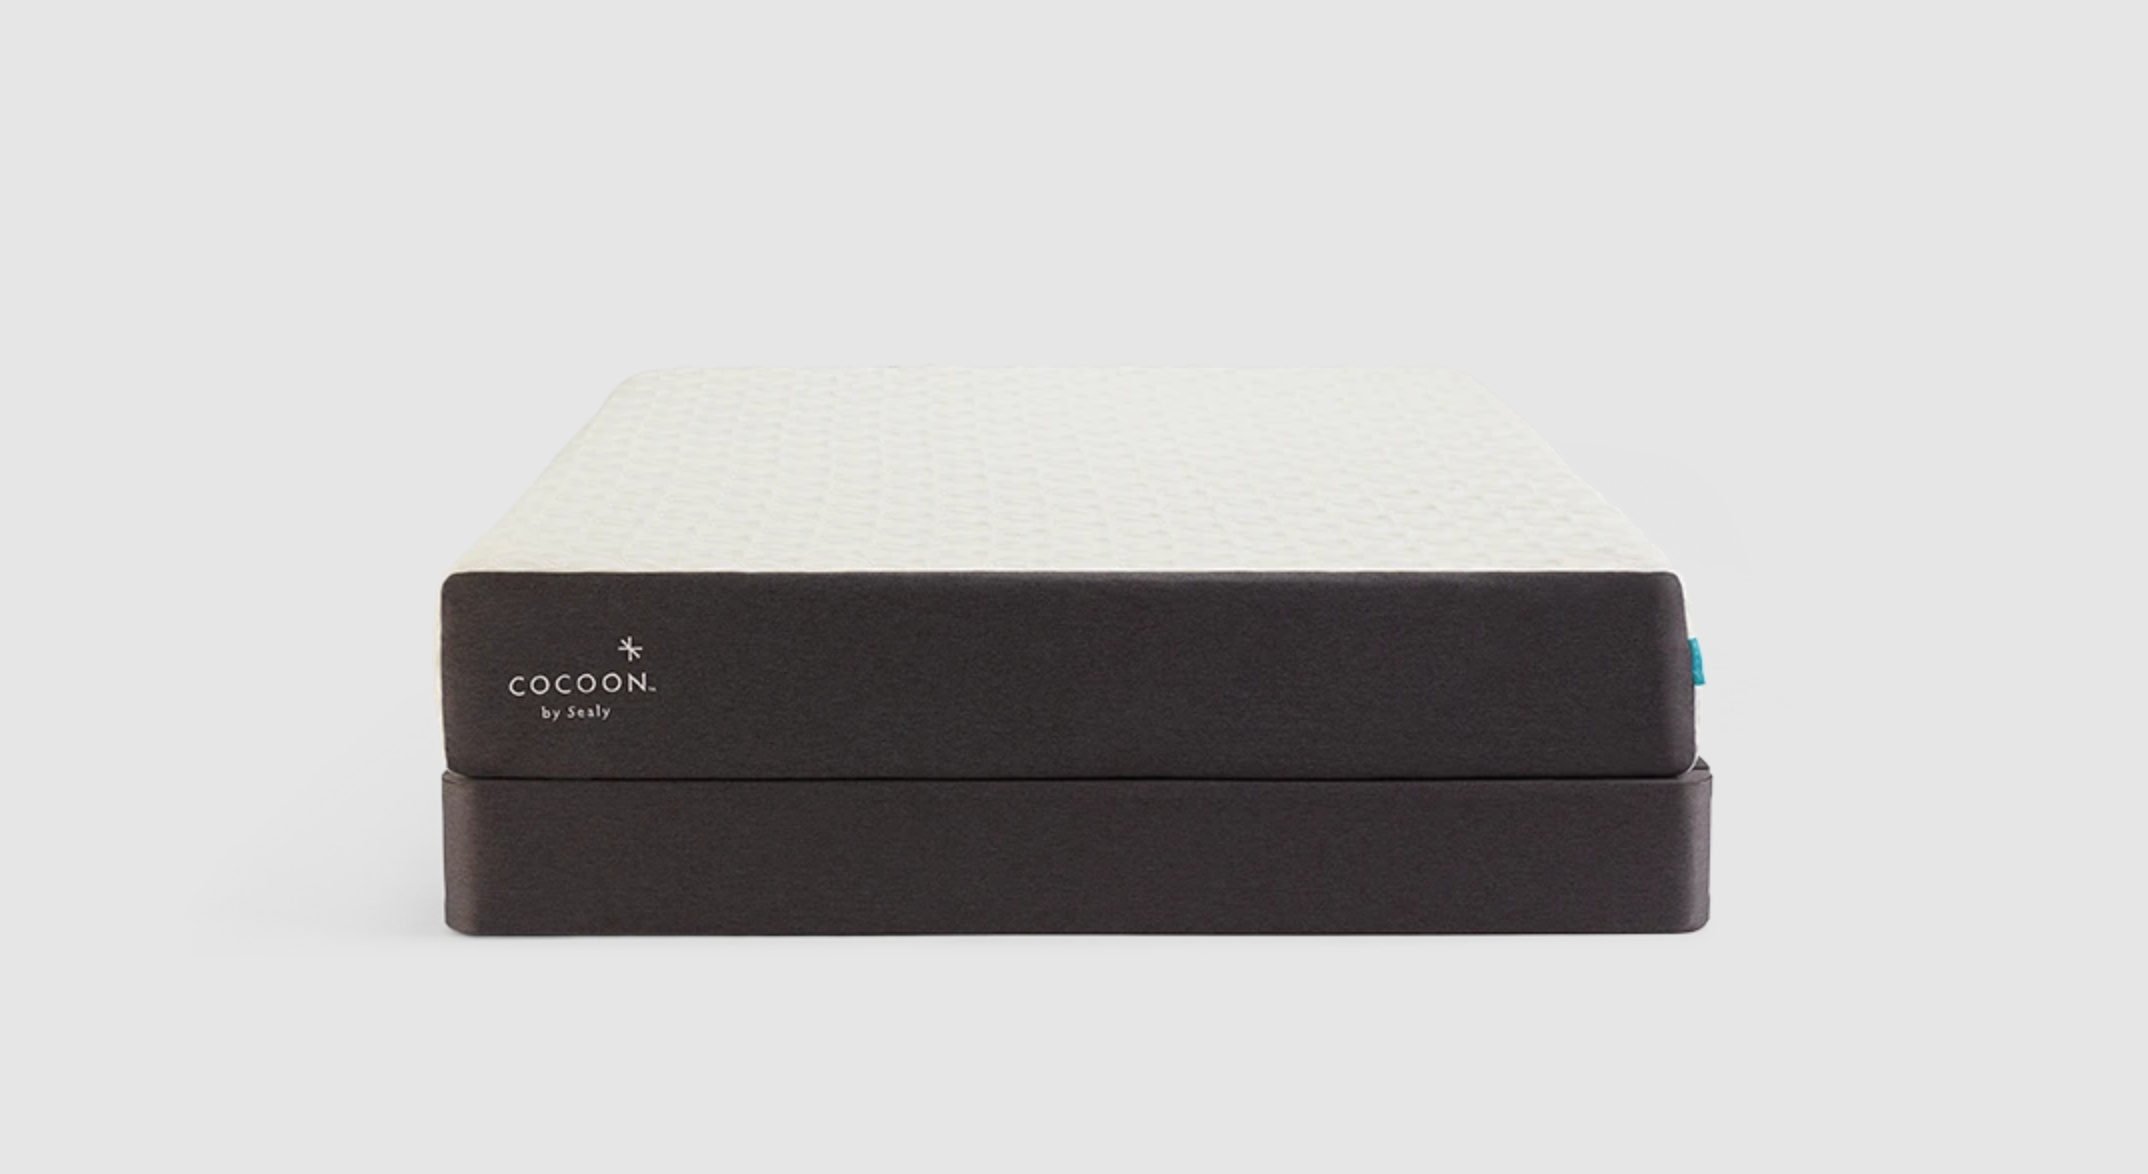 Cocoon by Sealy Chill Memory Foam Mattress